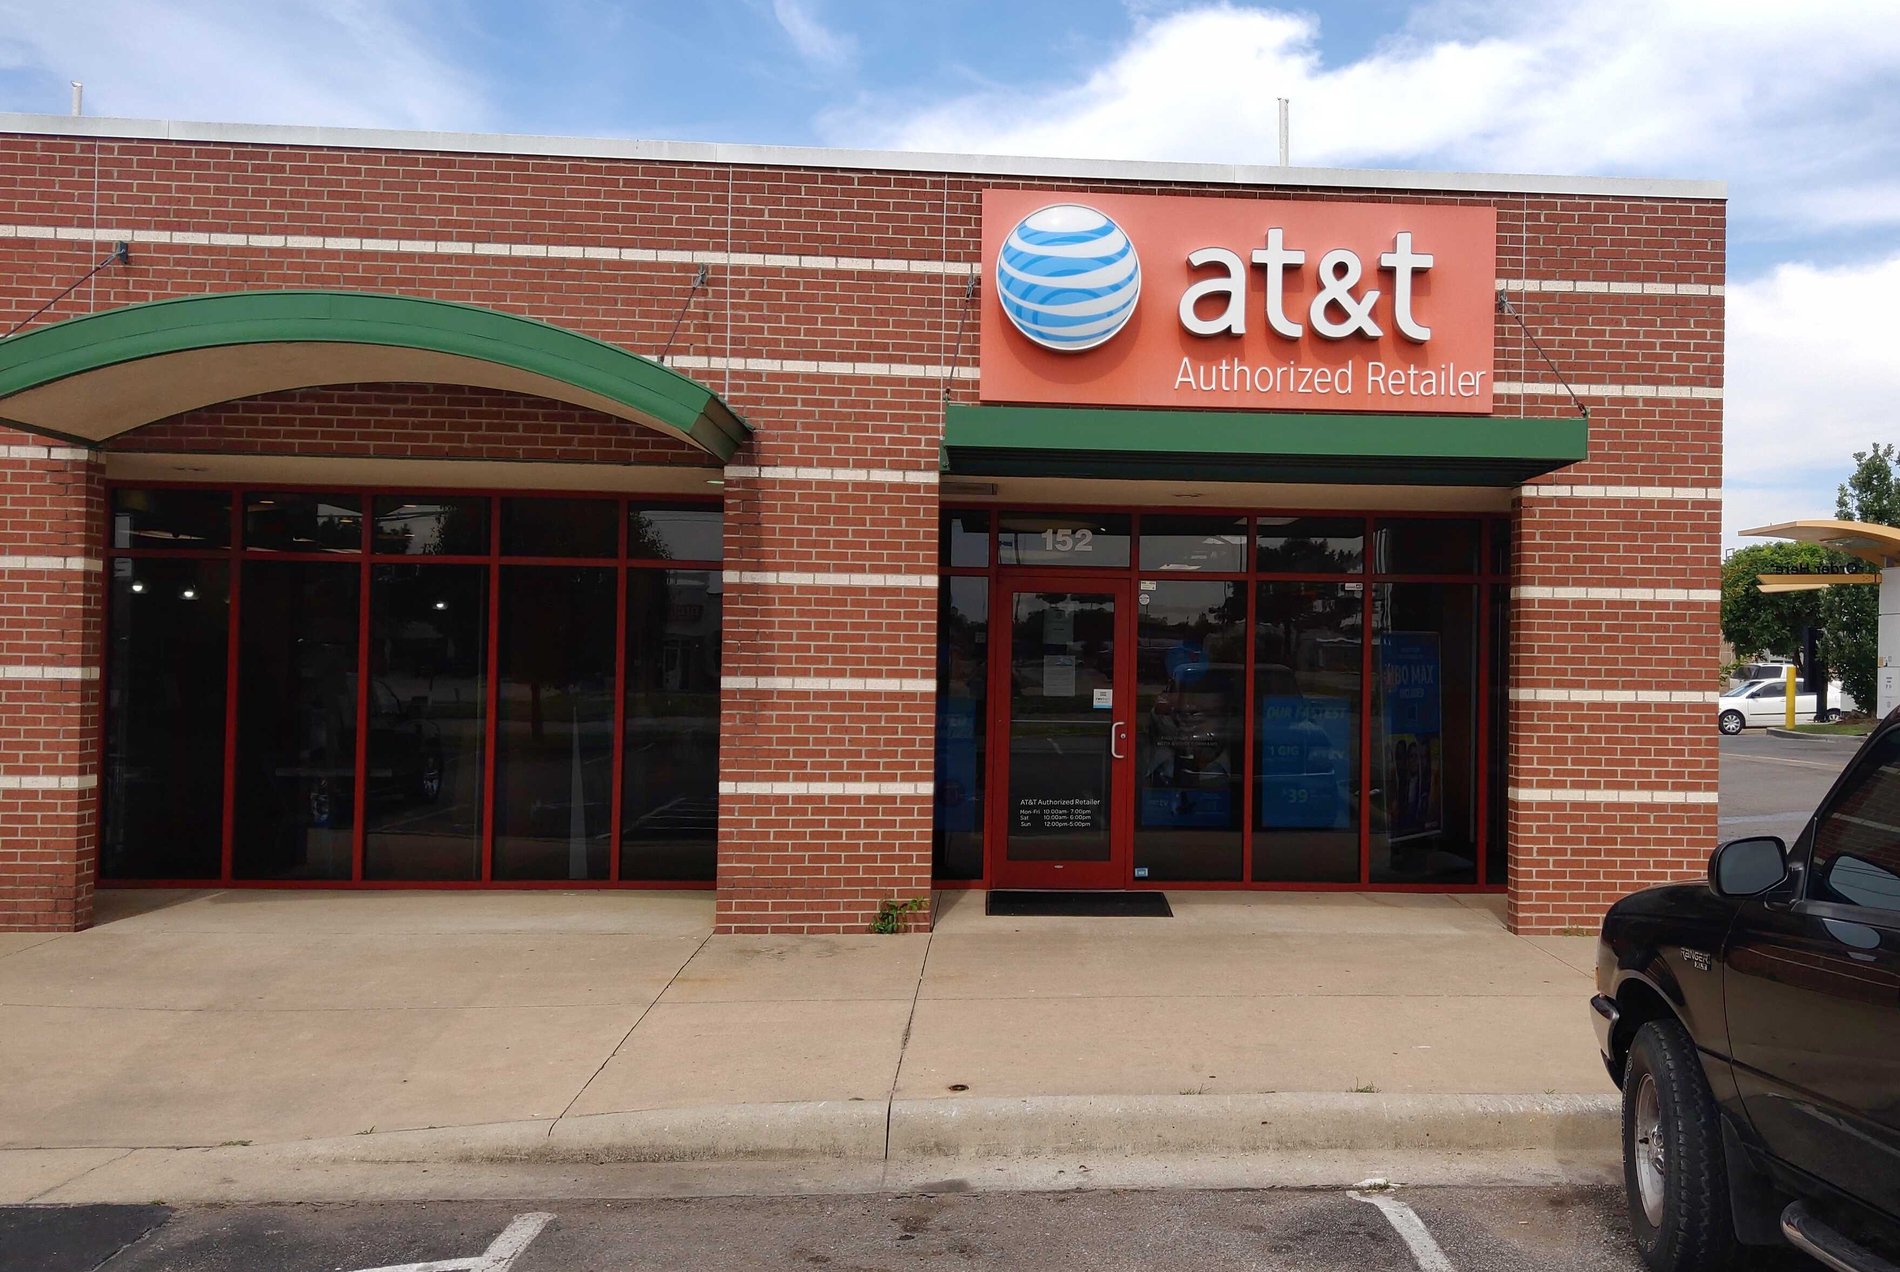 We are your local Norman, OK AT&T Authorized Retailer - Communication Solutions